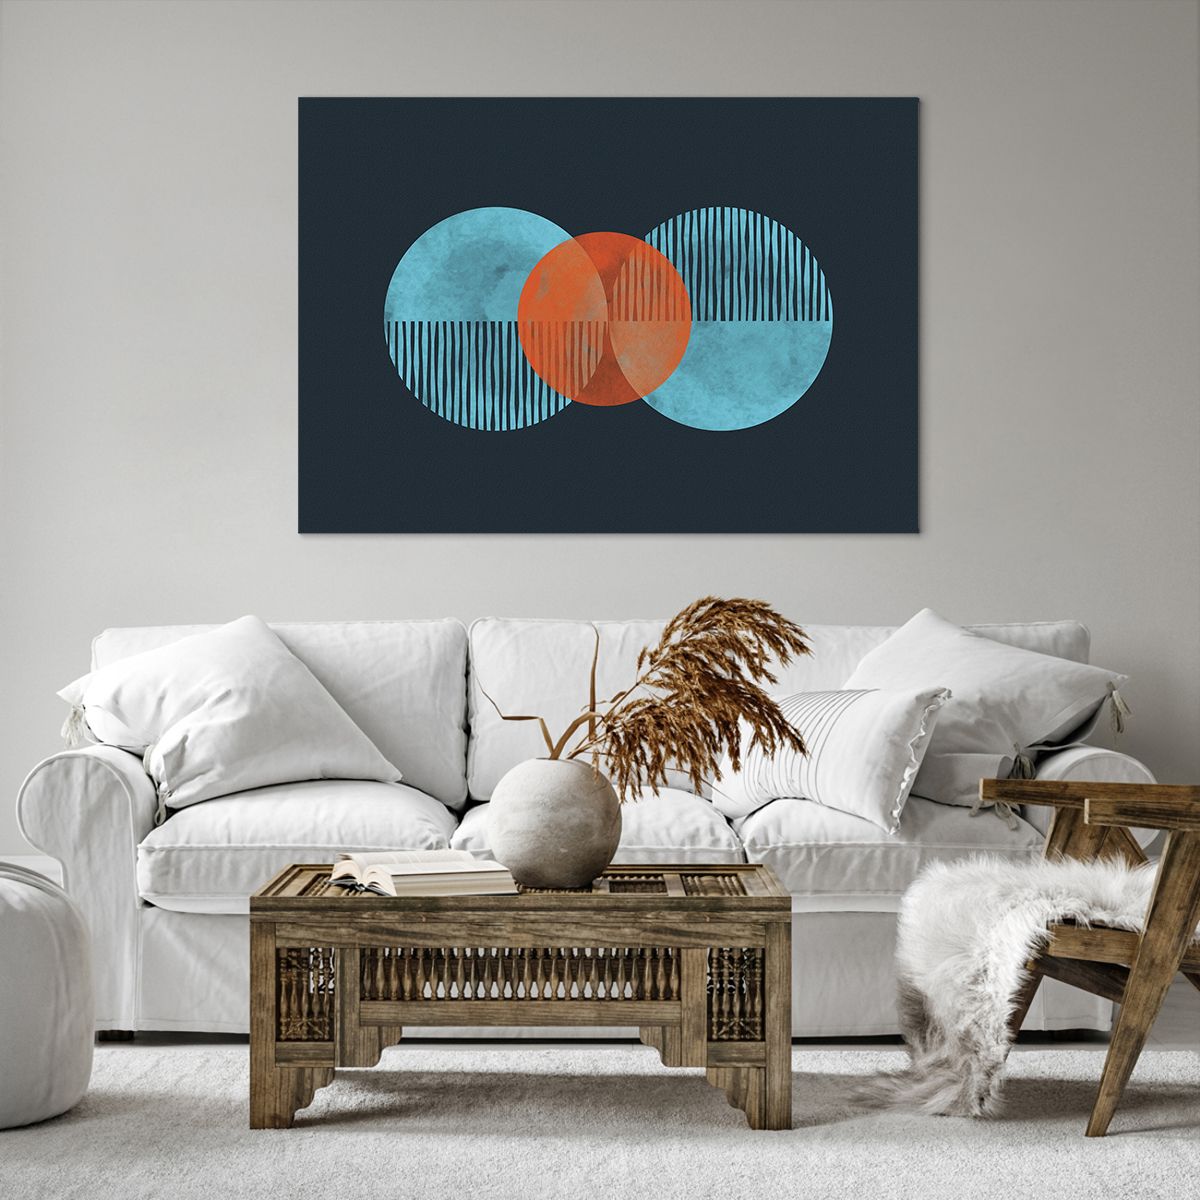 Canvas picture Abstraction, Canvas picture Art, Canvas picture Geometric Pattern, Canvas picture Wheels, Canvas picture Modern Art